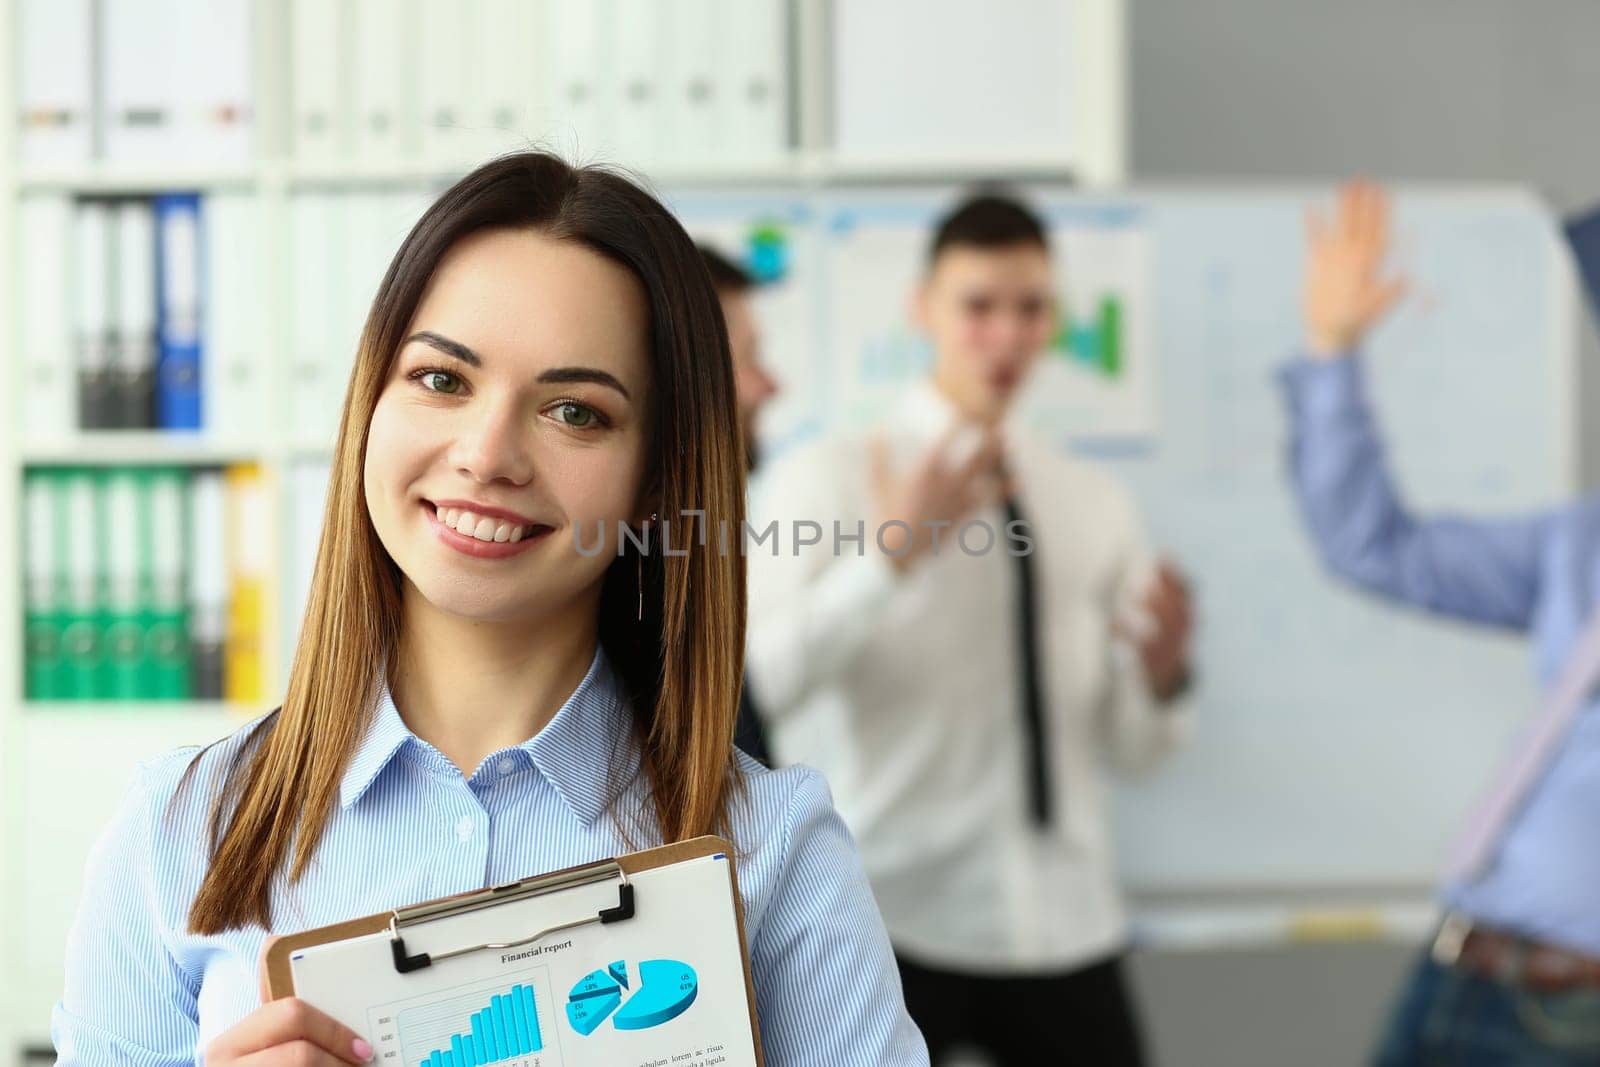 Business woman with staff and group of people in background in office. Educational seminar lecture concept